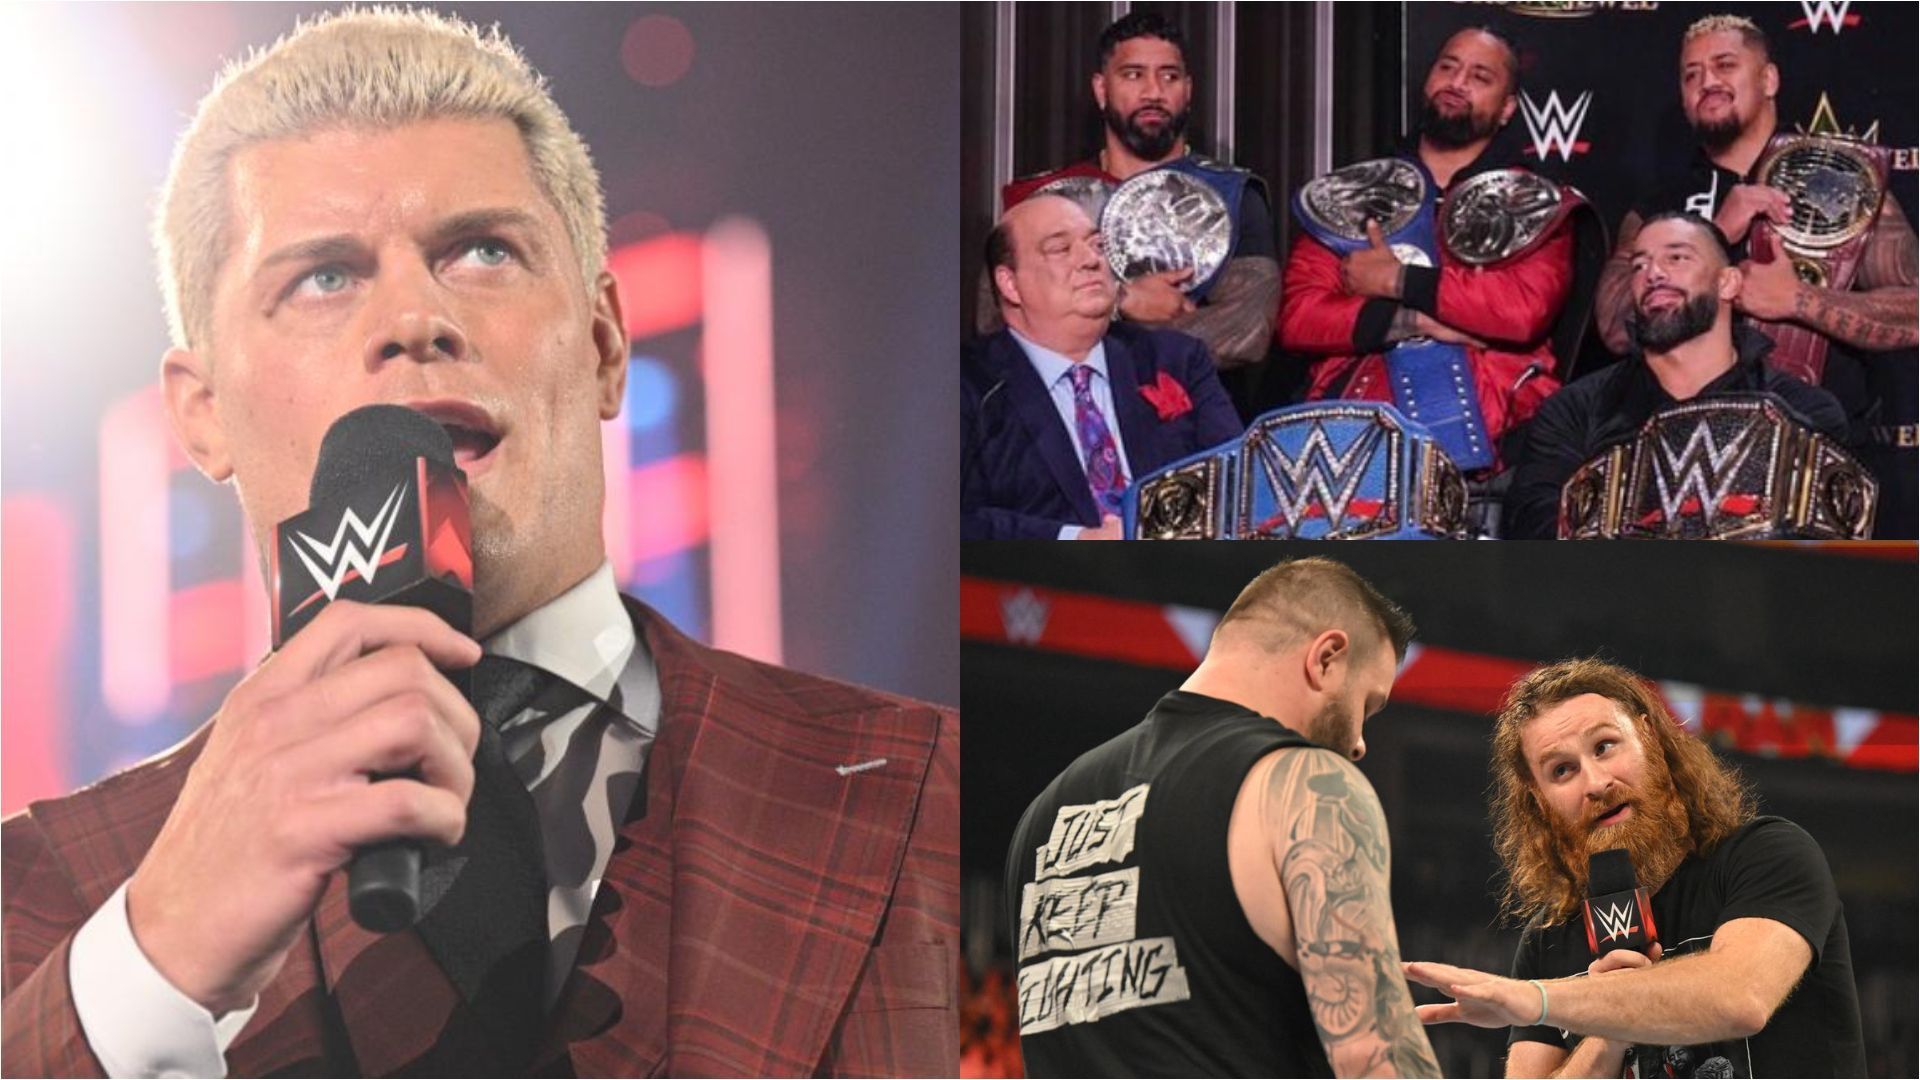 The WWE landscape could be in for some seismic shifts in the coming months